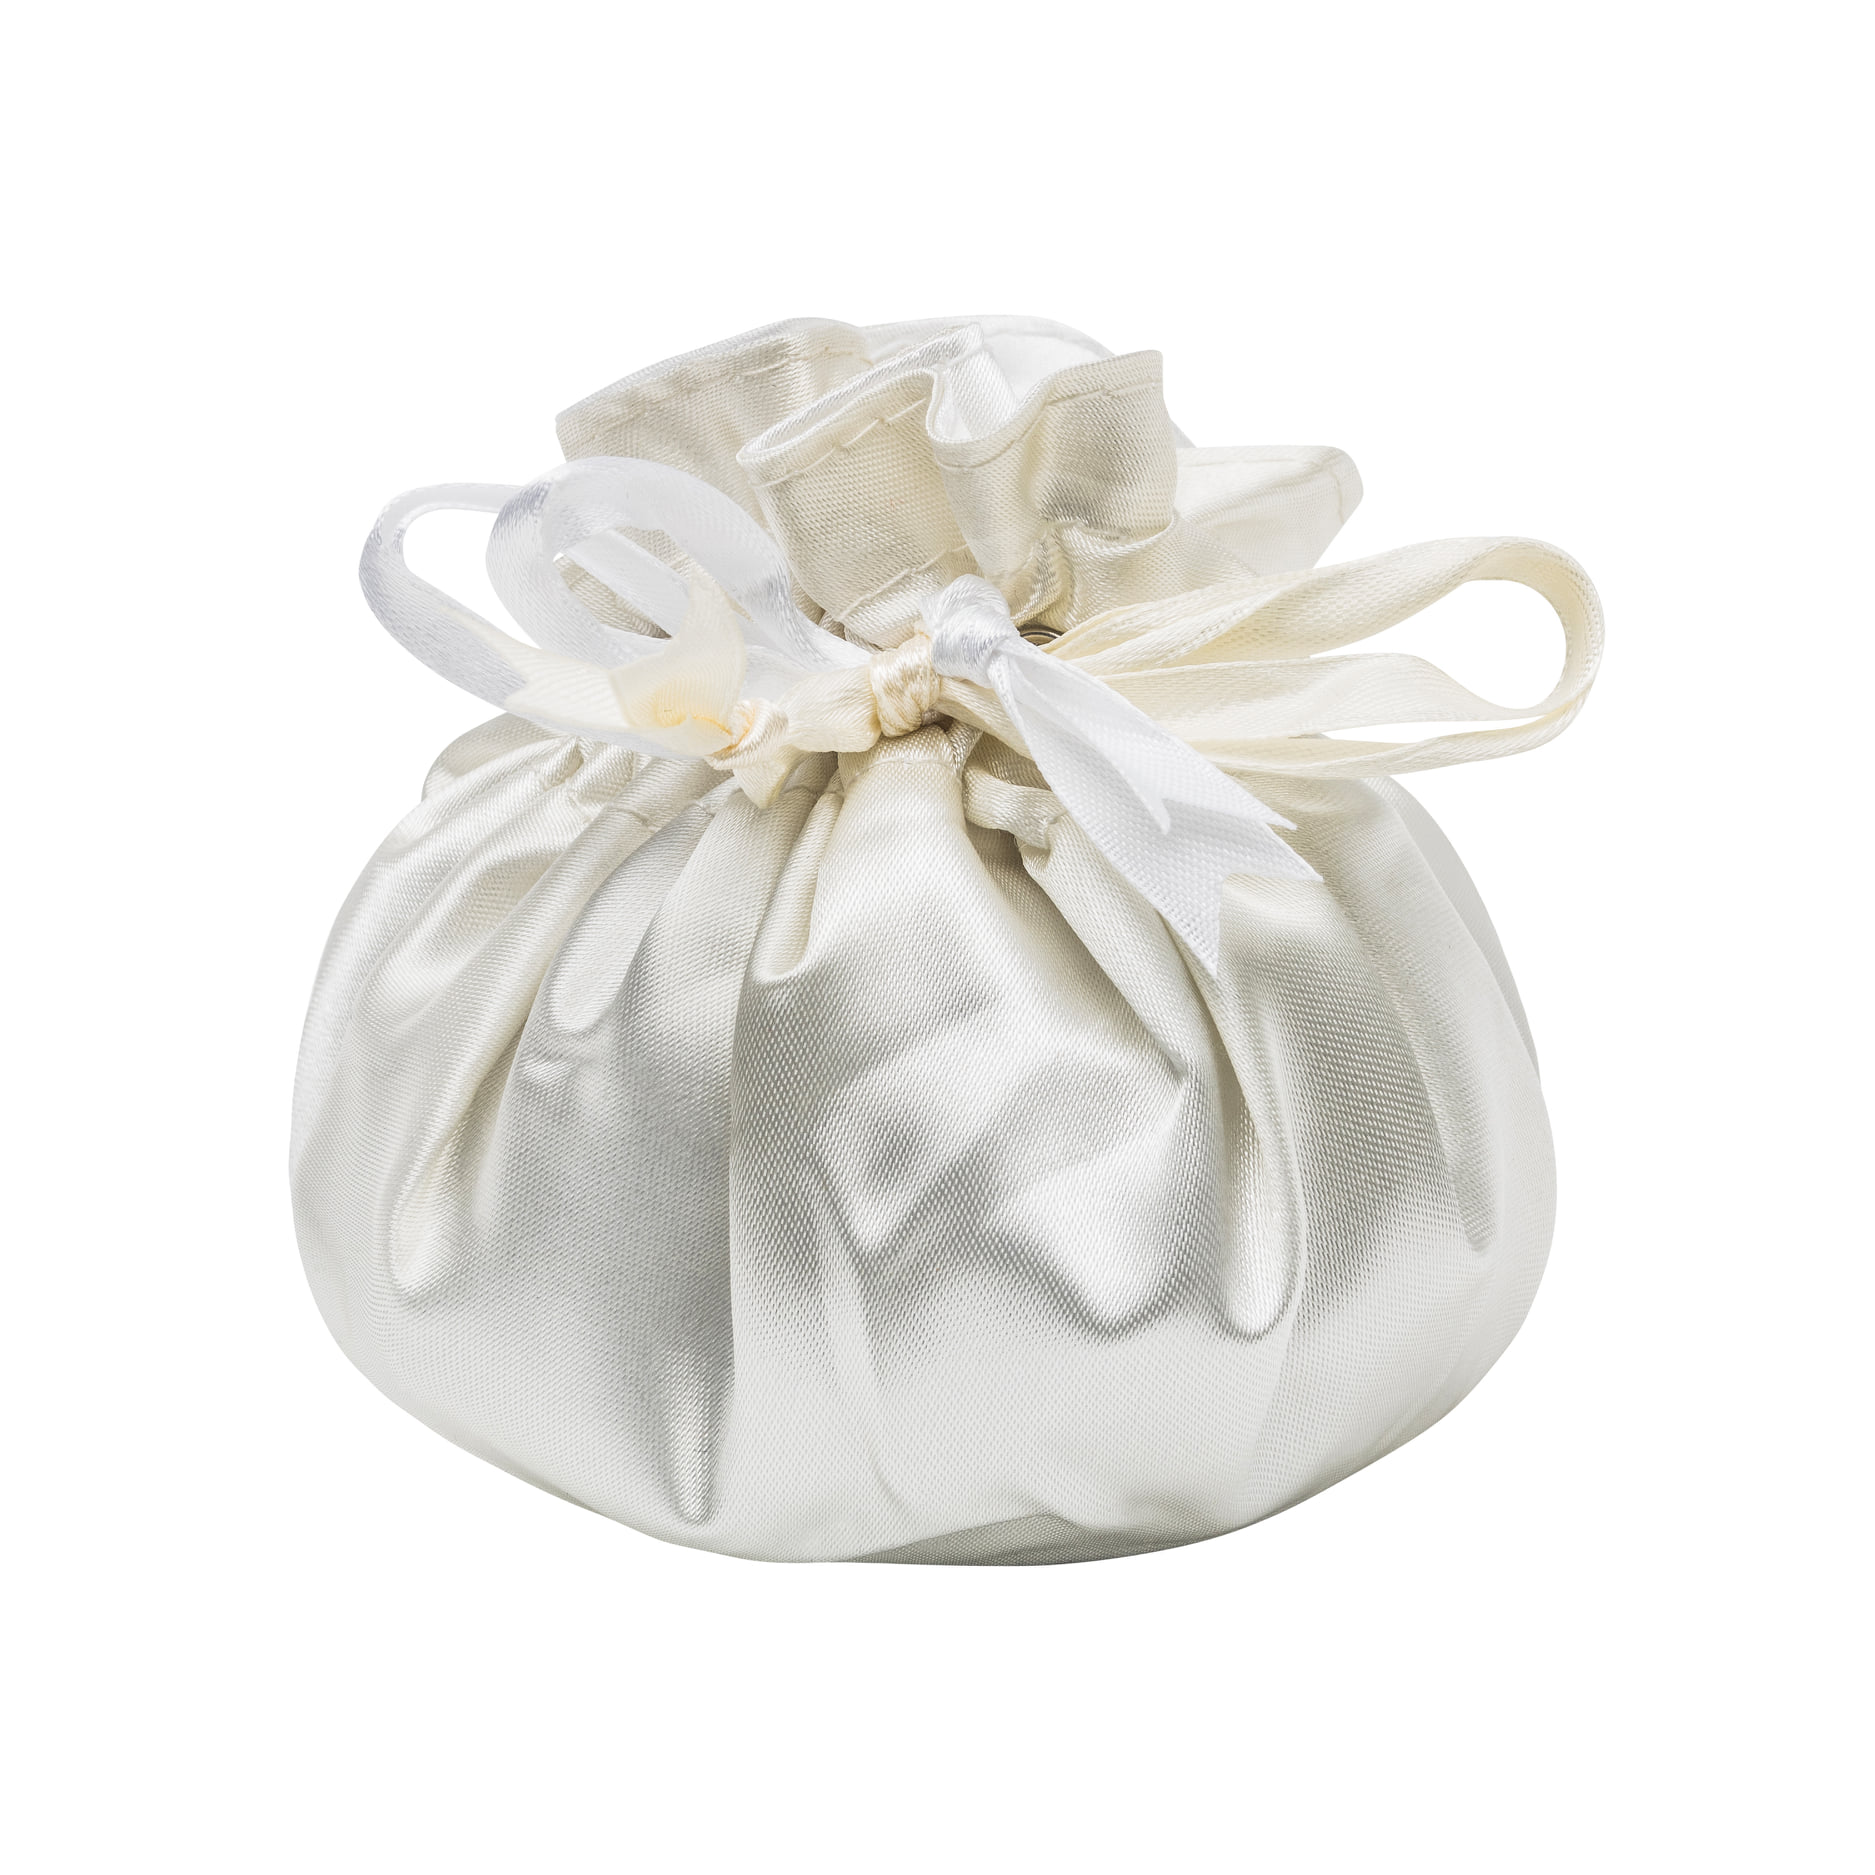 Off-White Satin Silk Jewelry Pouch - PRESTIGE CREATIONS FACTORY